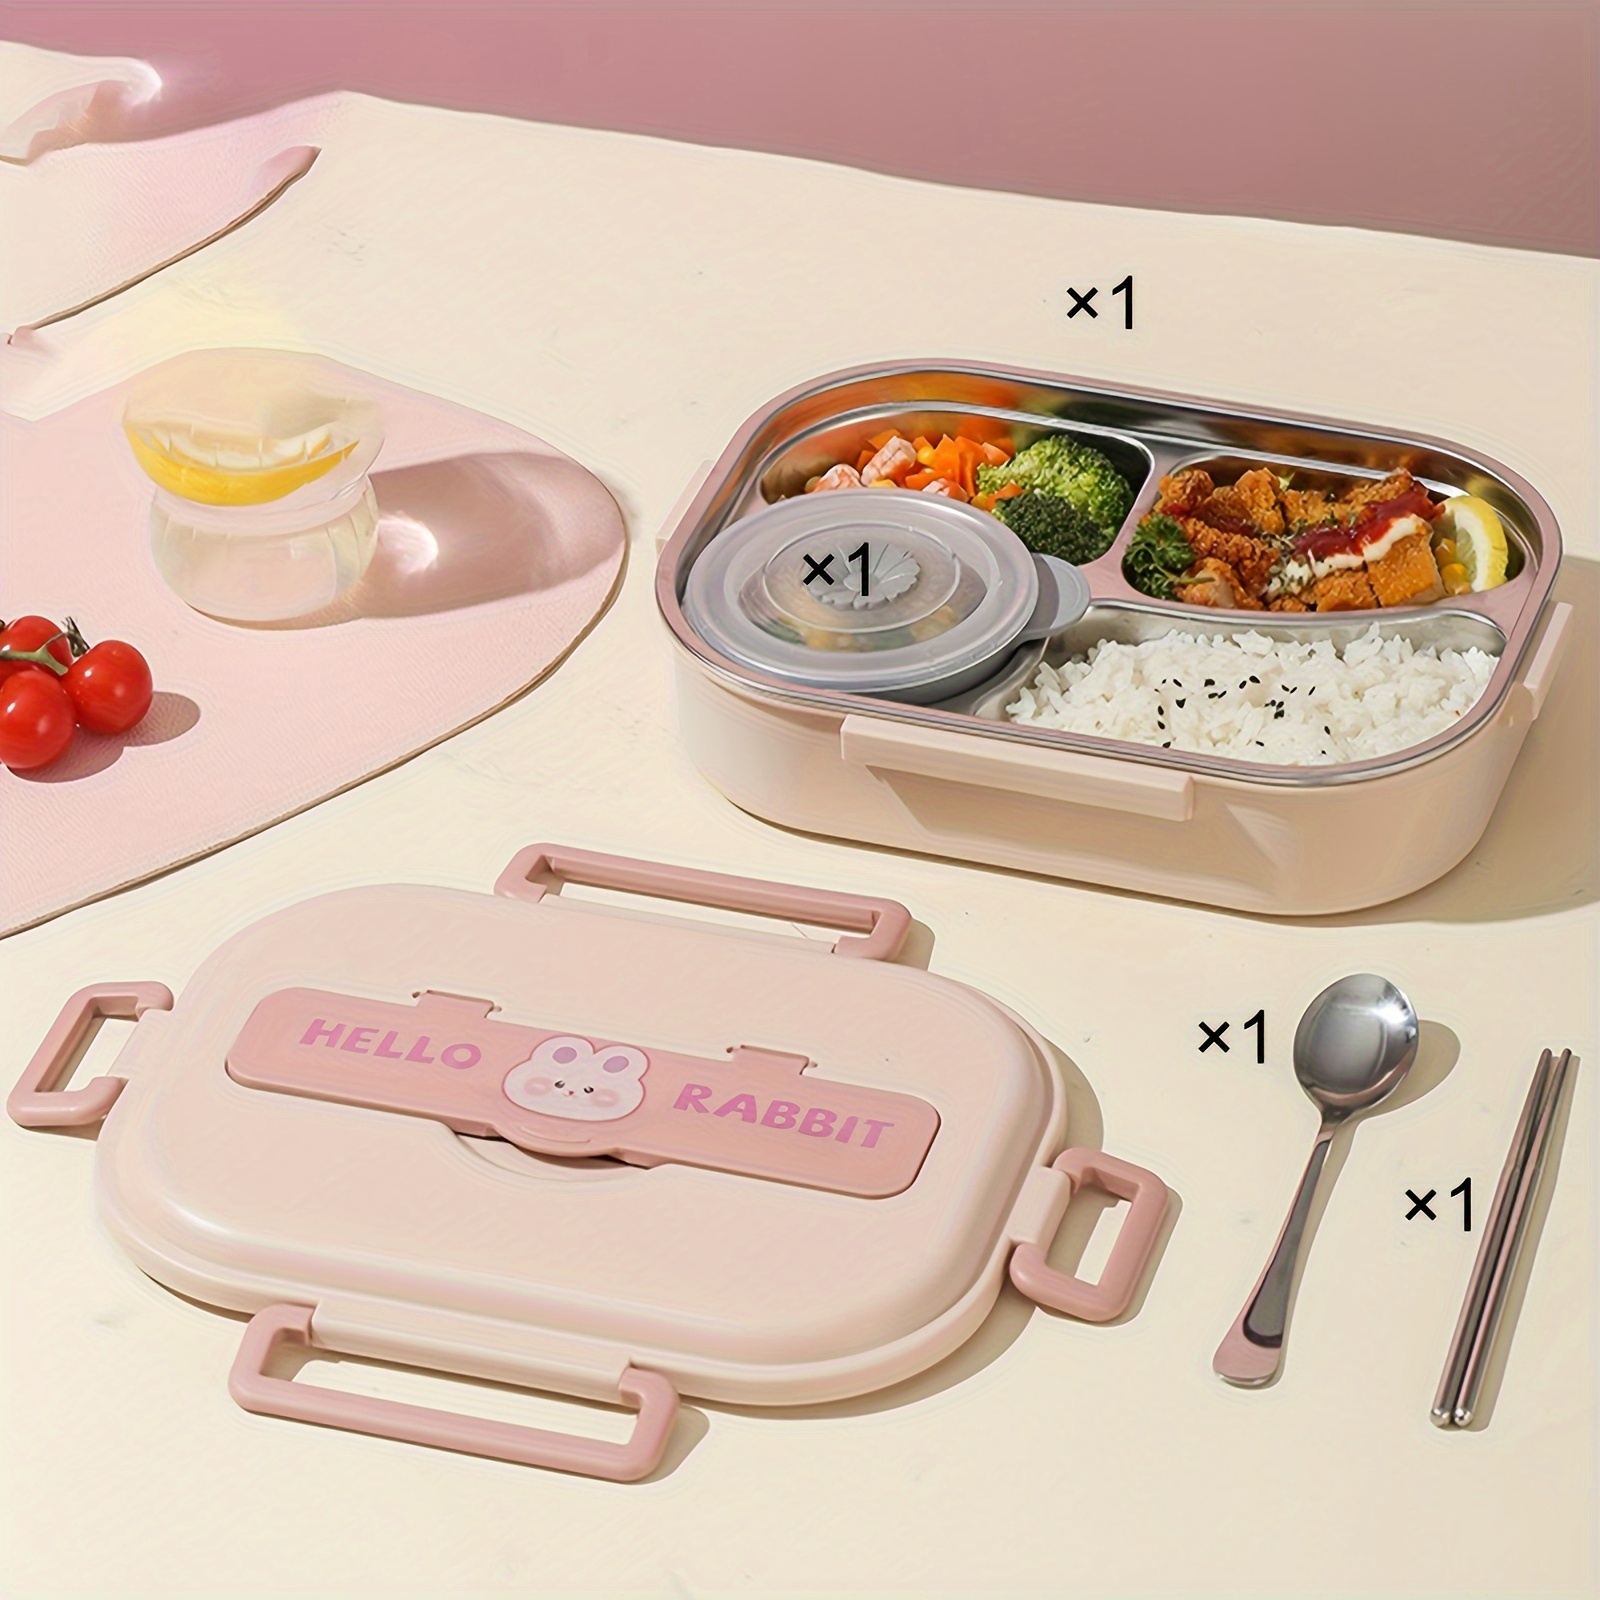 hello rabbit 4 piece stainless steel insulated lunch box set with dividers sealed lid microwave safe square bento box manual operation no electricity needed